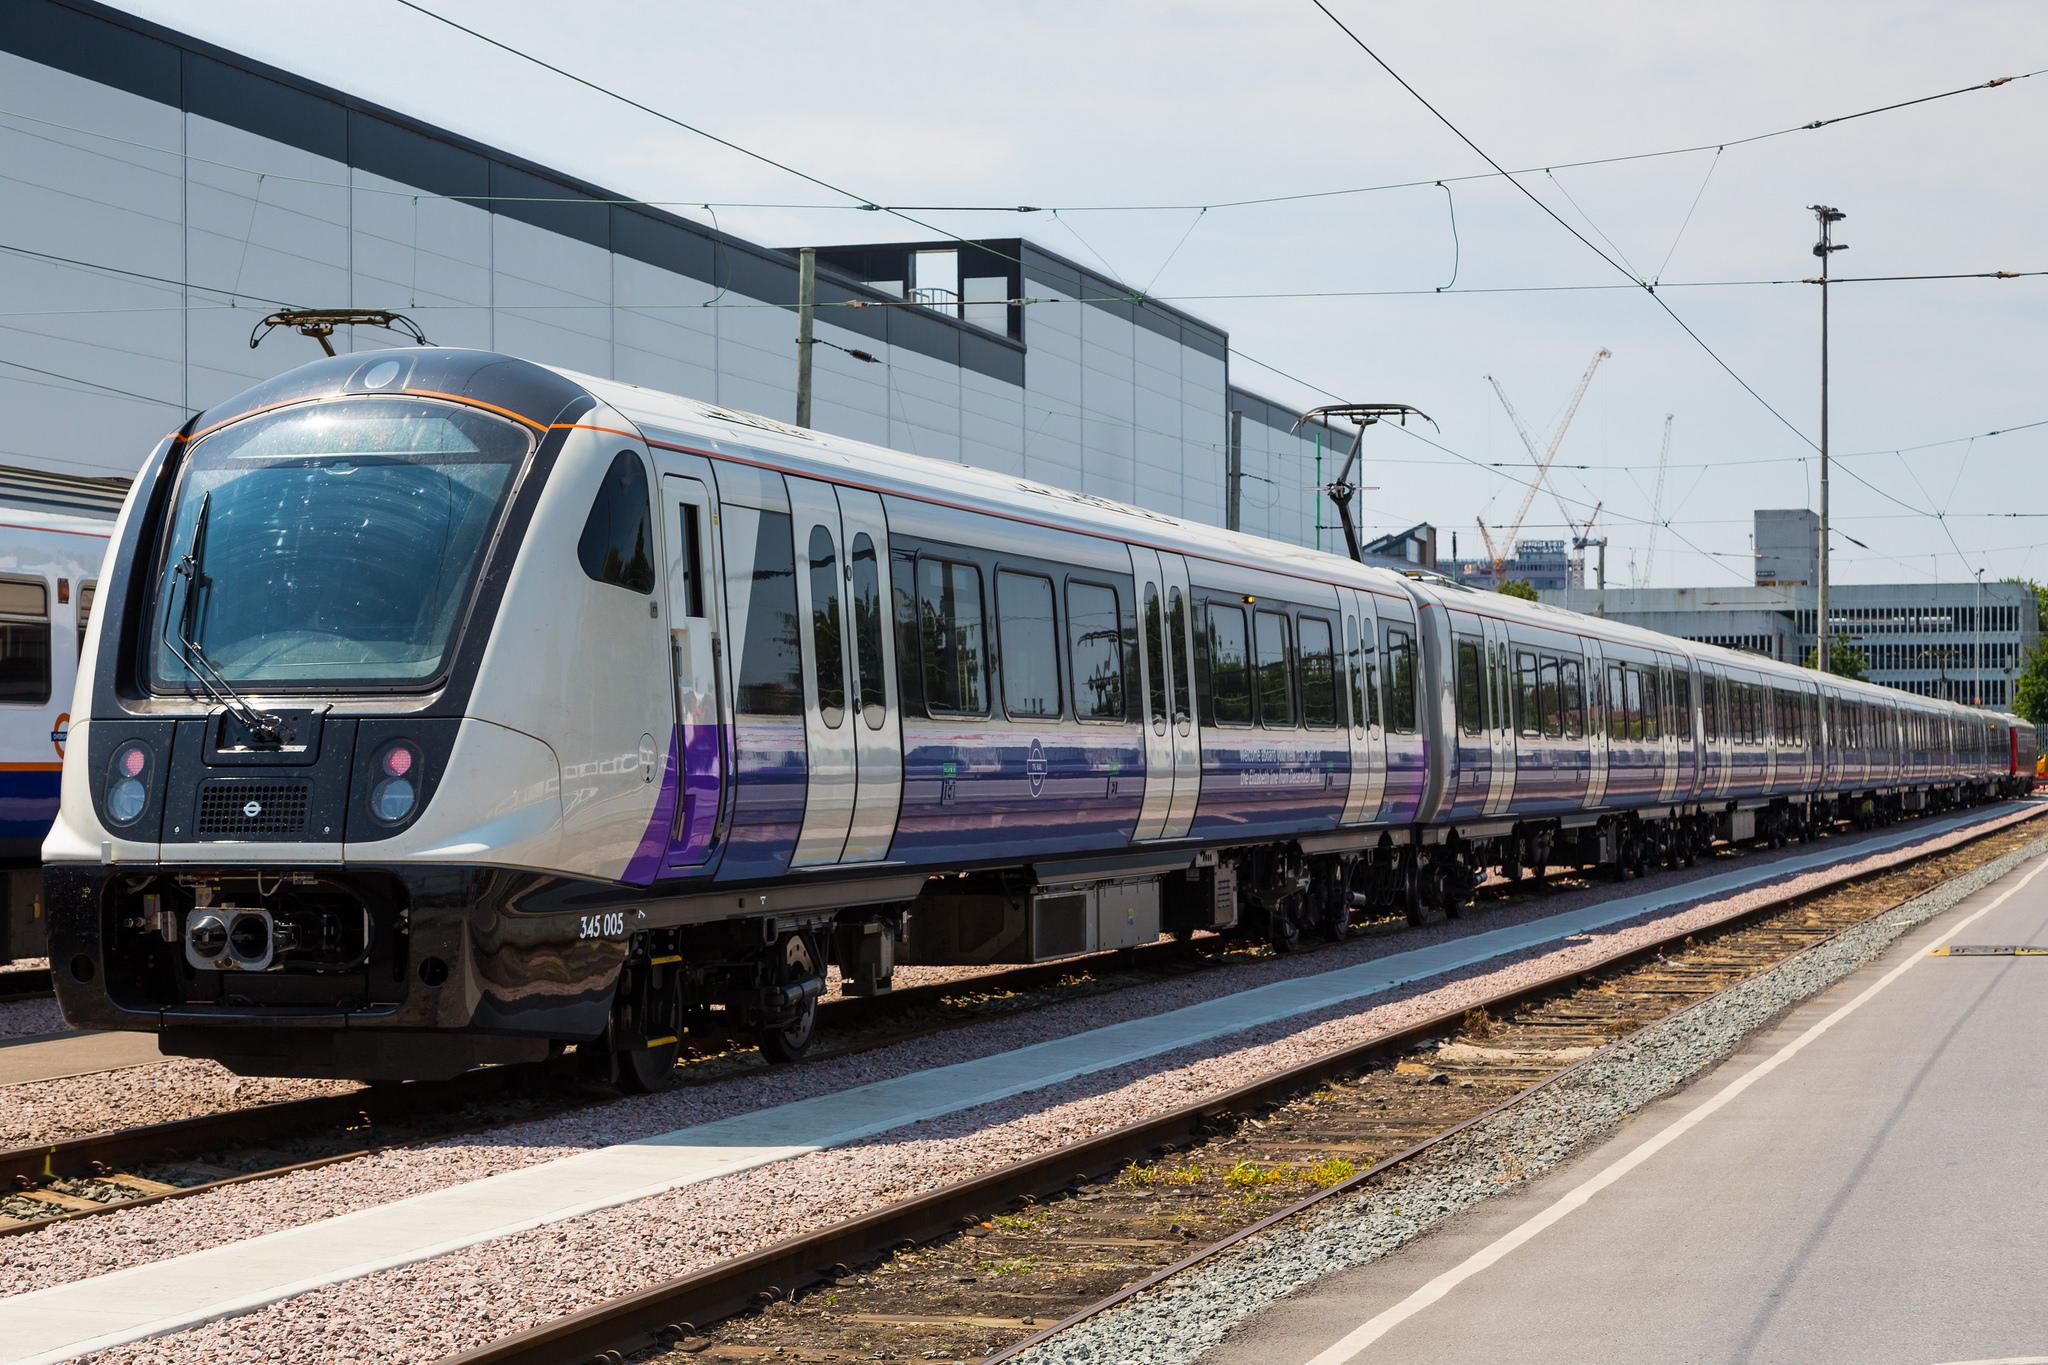 Roll on the new Elizabeth line trains, which will provide a far more reliable and affordable airport service